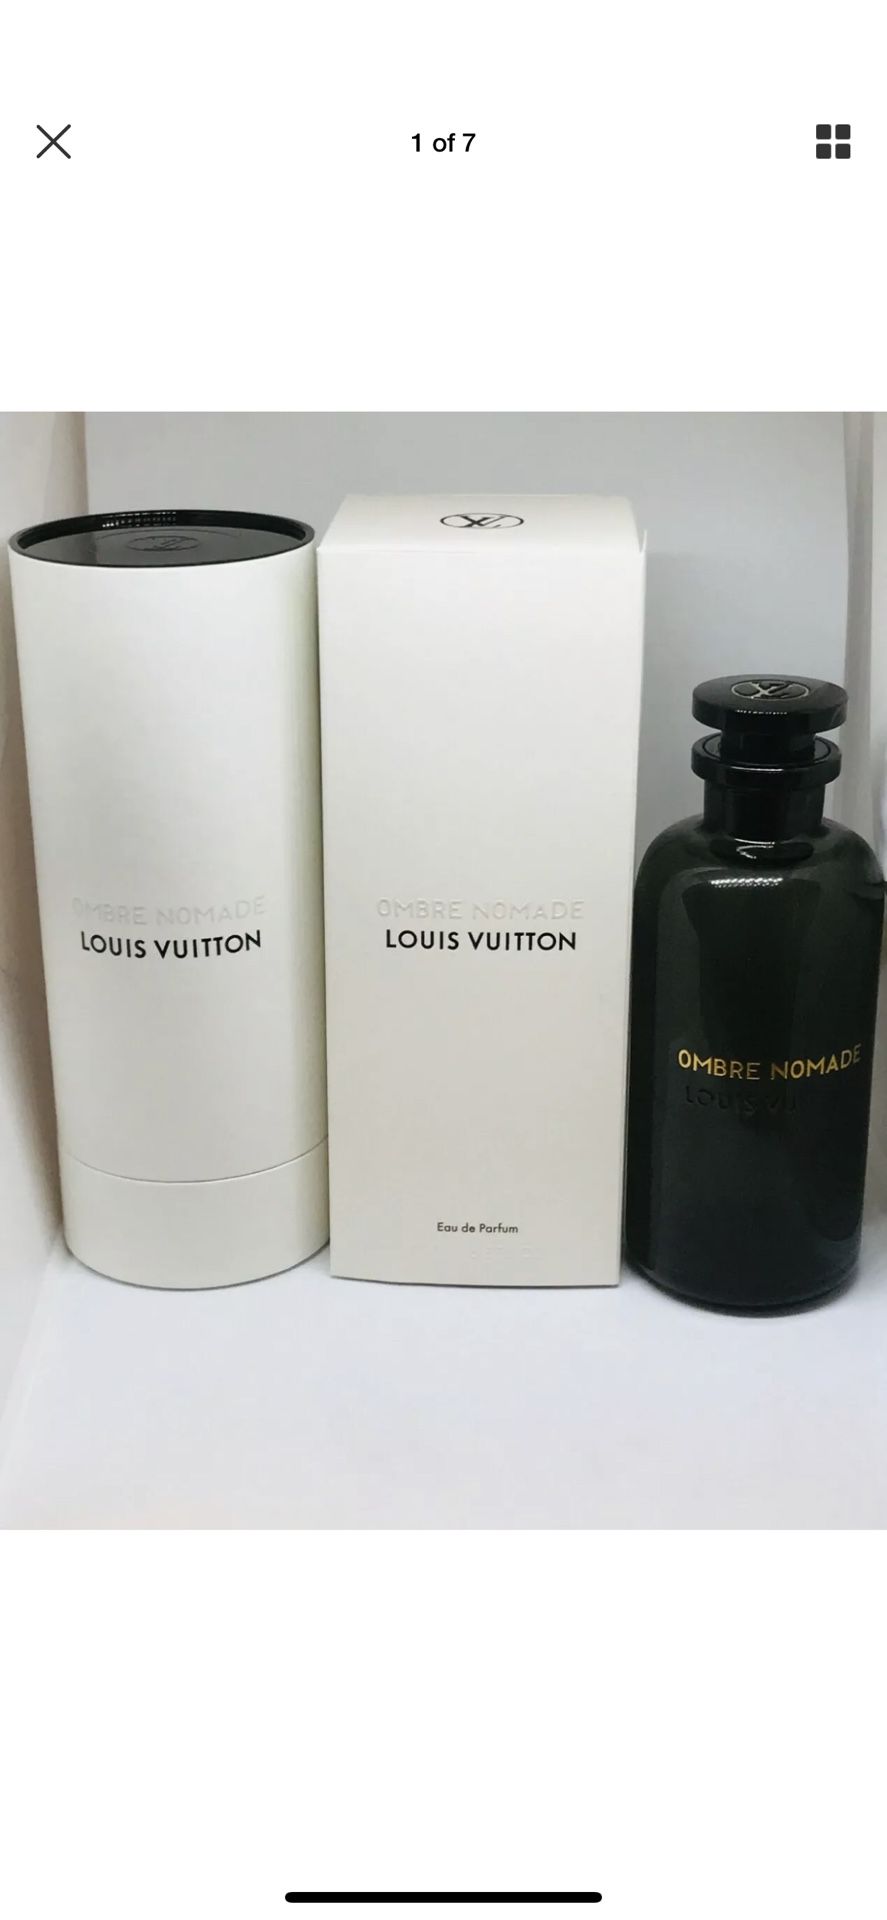 Louis Vuitton Ombre Nomade review! Loads have asked, so here it is